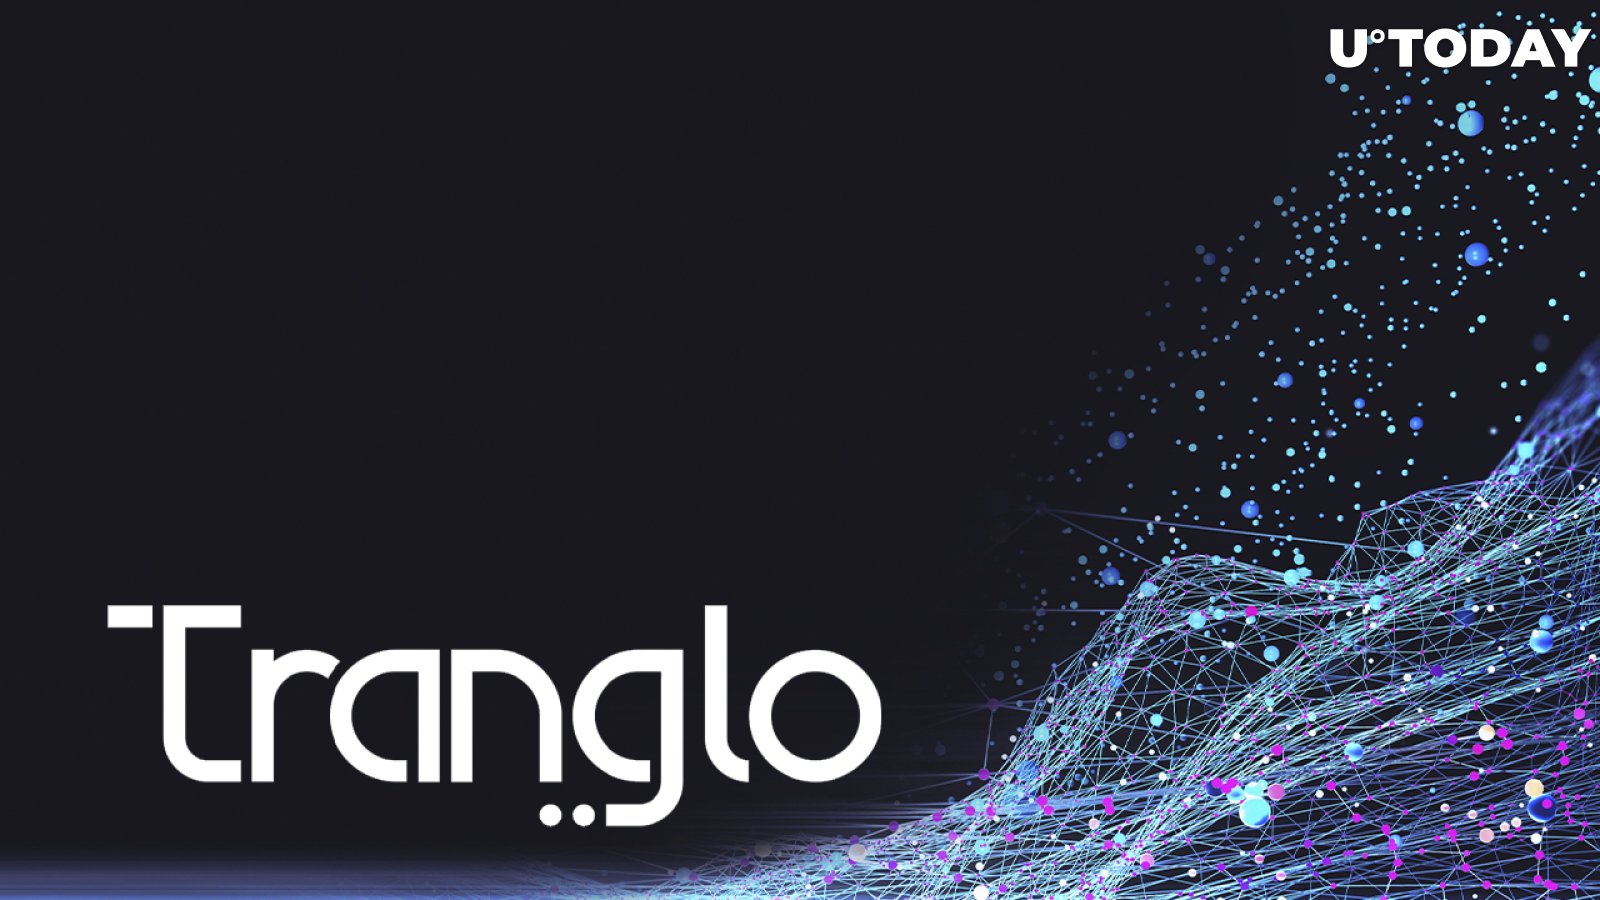 Ripple Partner Tranglo Launches Payment Options to Expand Coverage via RippleNet